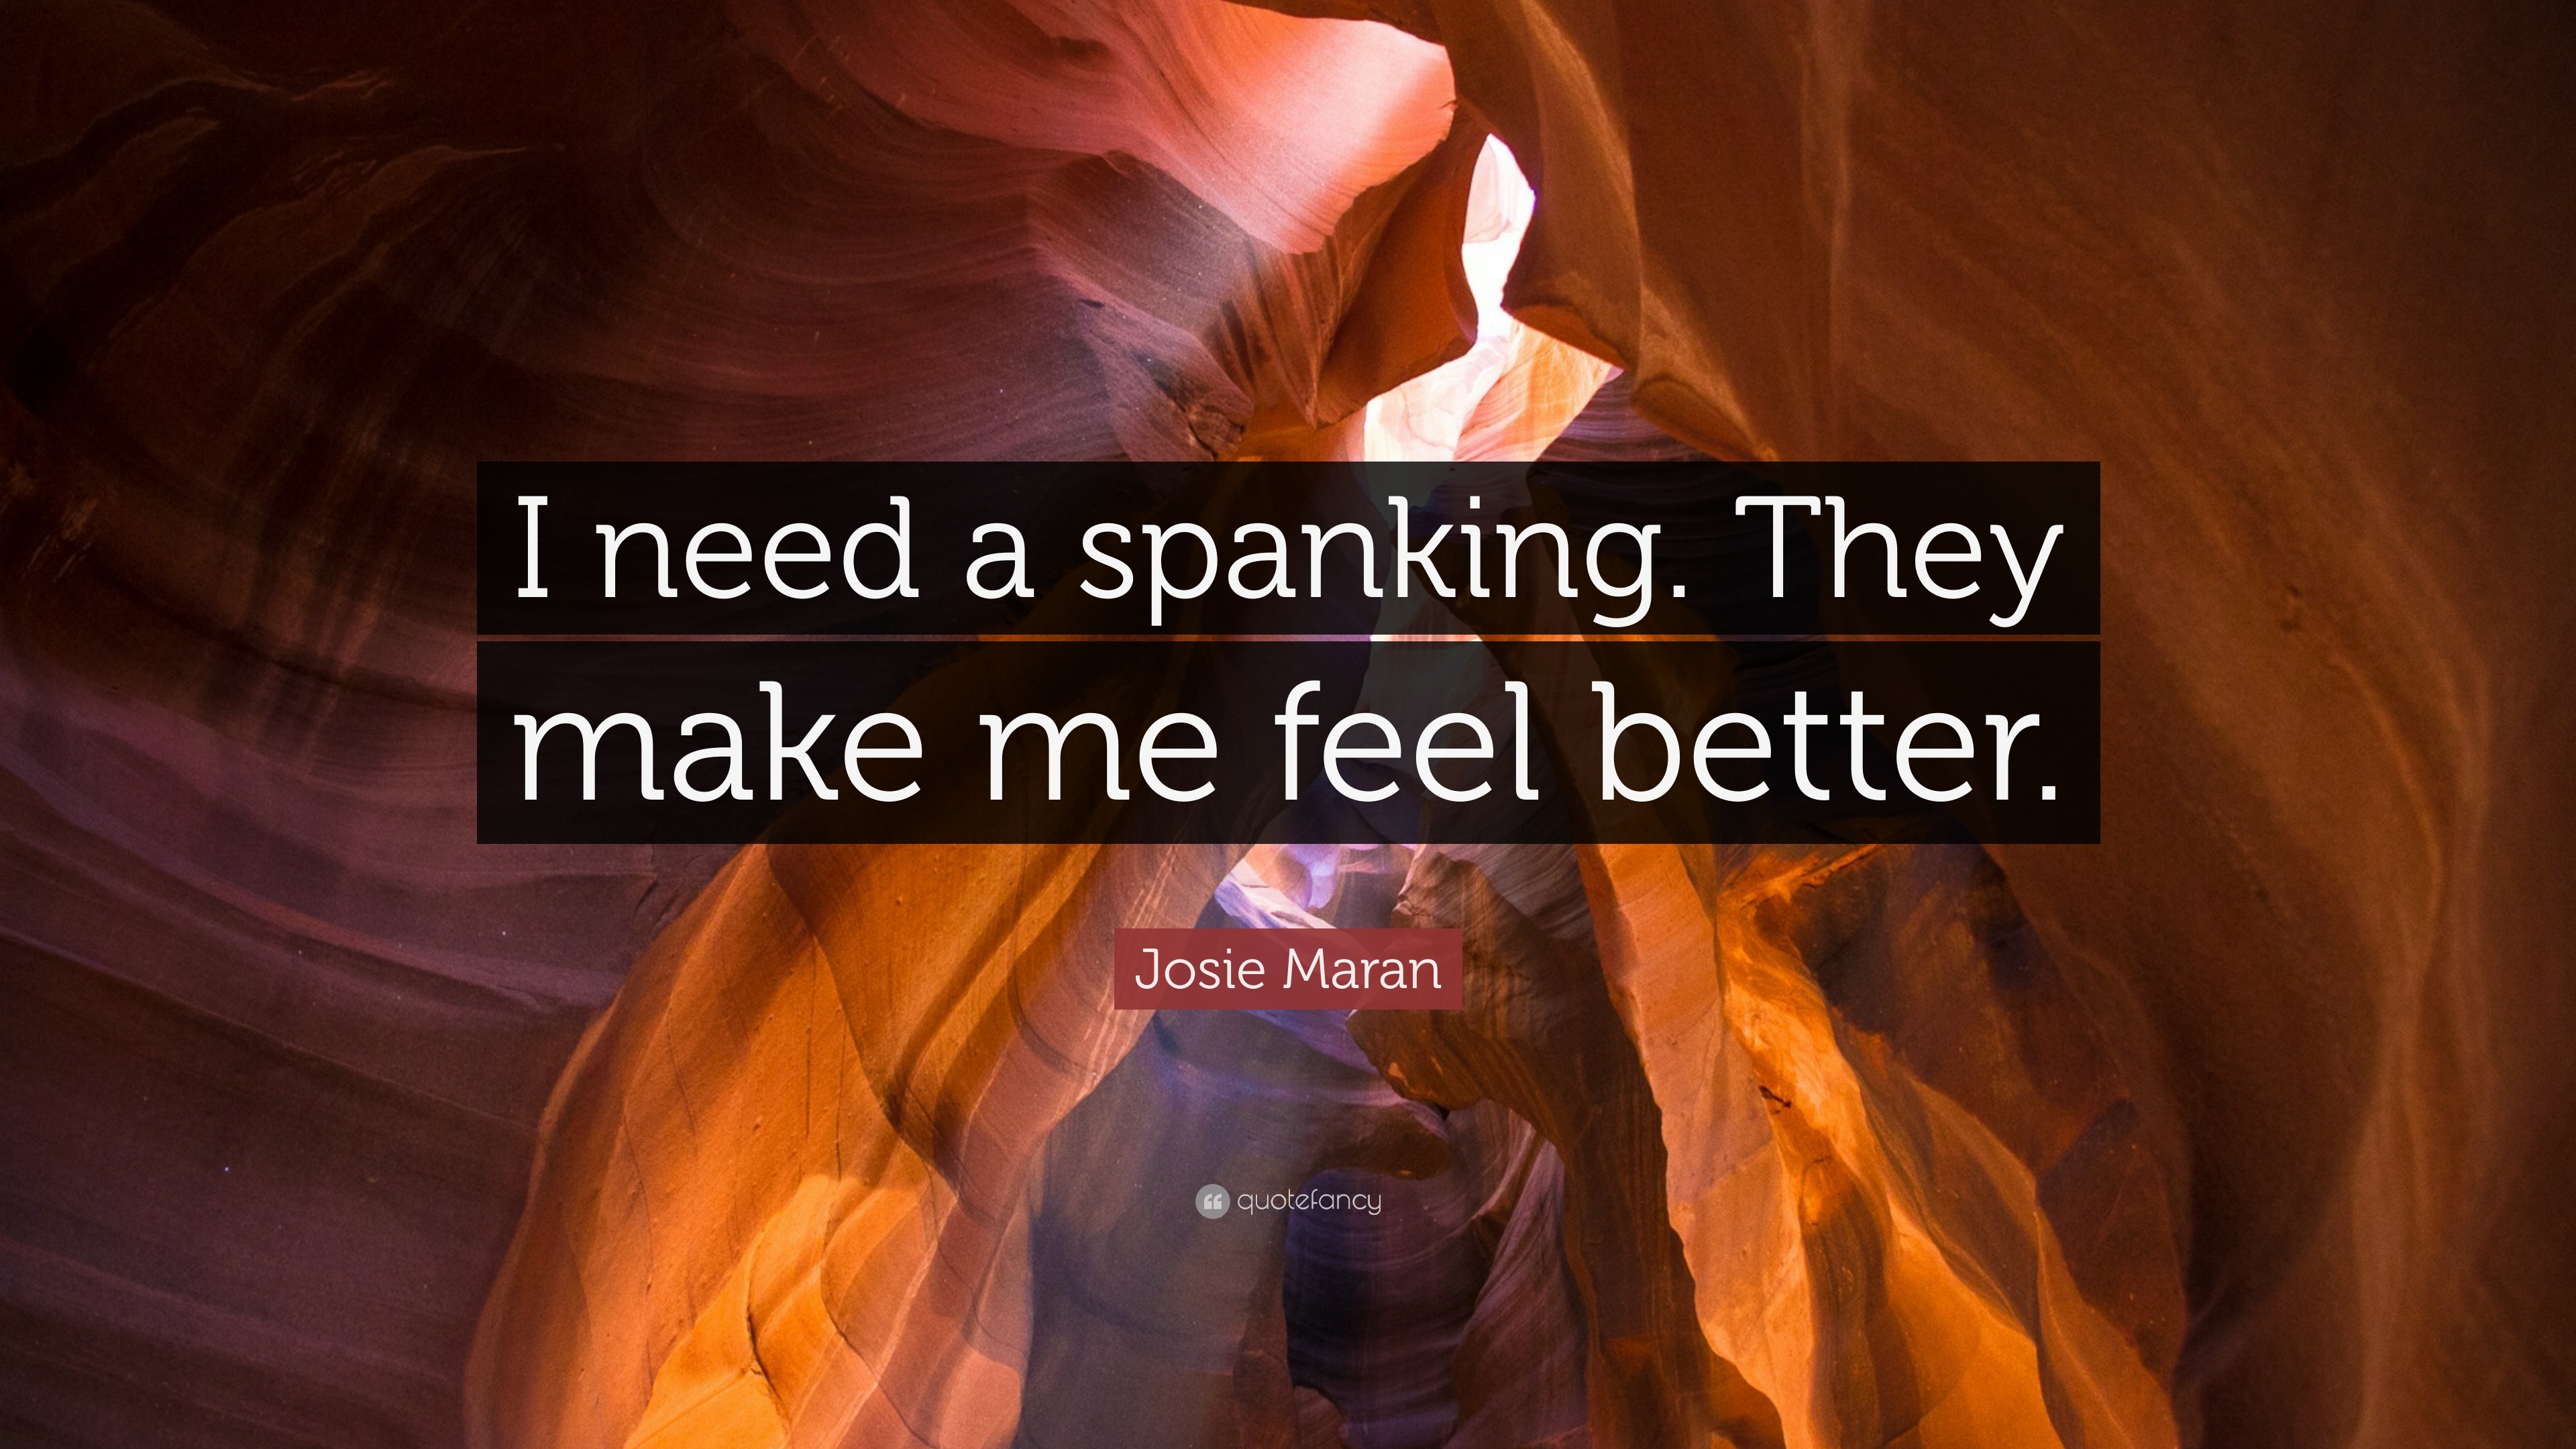 3840x2160 Josie Maran Quote: “I need a spanking. They make me feel better.